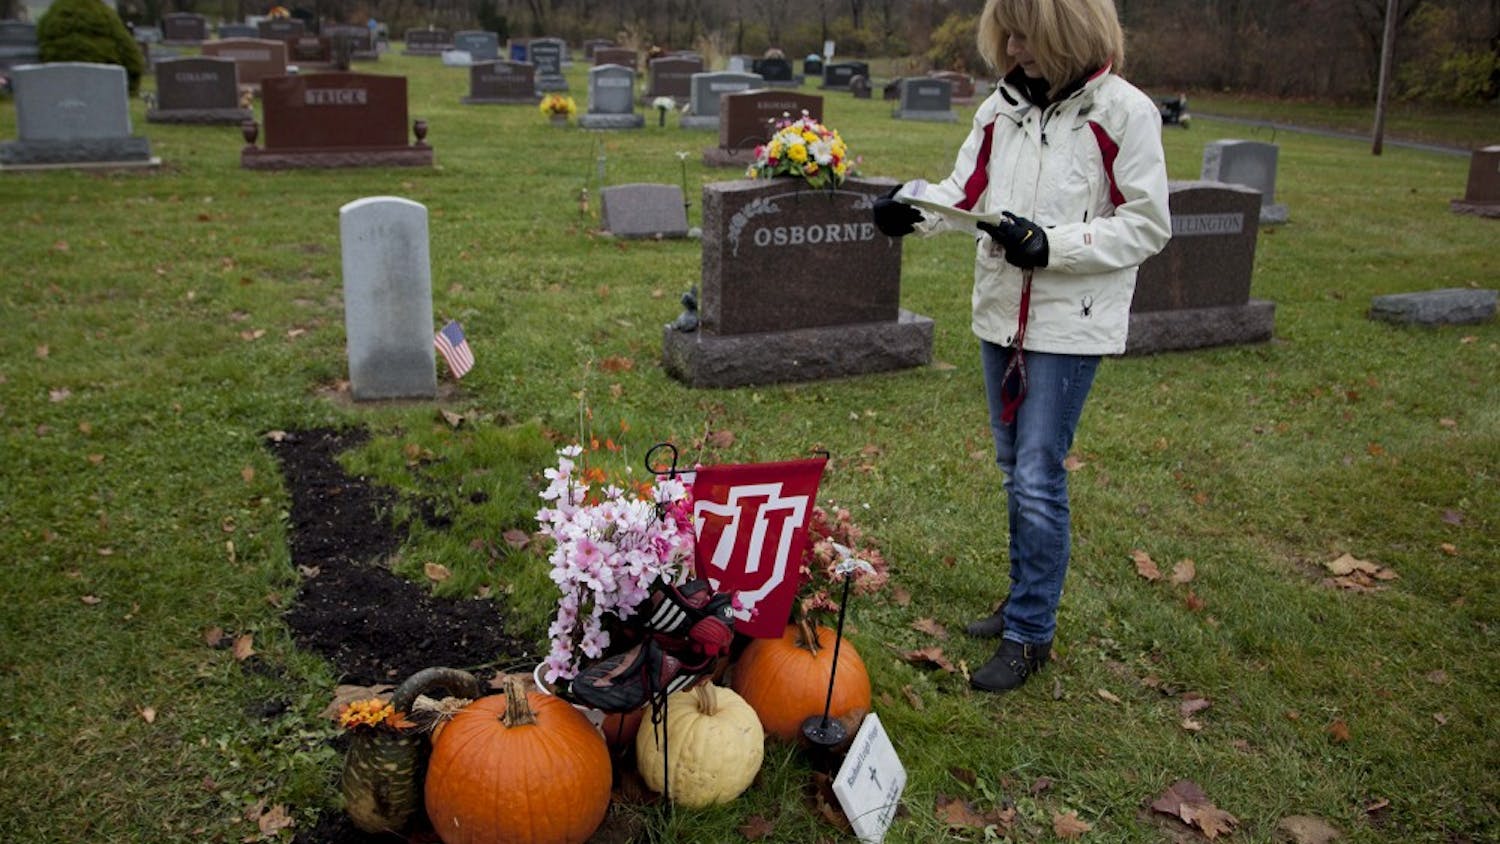 Angi Fiege stands at the grave of her  19 year old daughter Rachael, who died Aug. 23, 2013 after falling down a set of stairs at her first party at IU. In the months after her death, Rachael's family and friends have been burdened by misconceptions of who their daughter was and what really happened to her that night. 